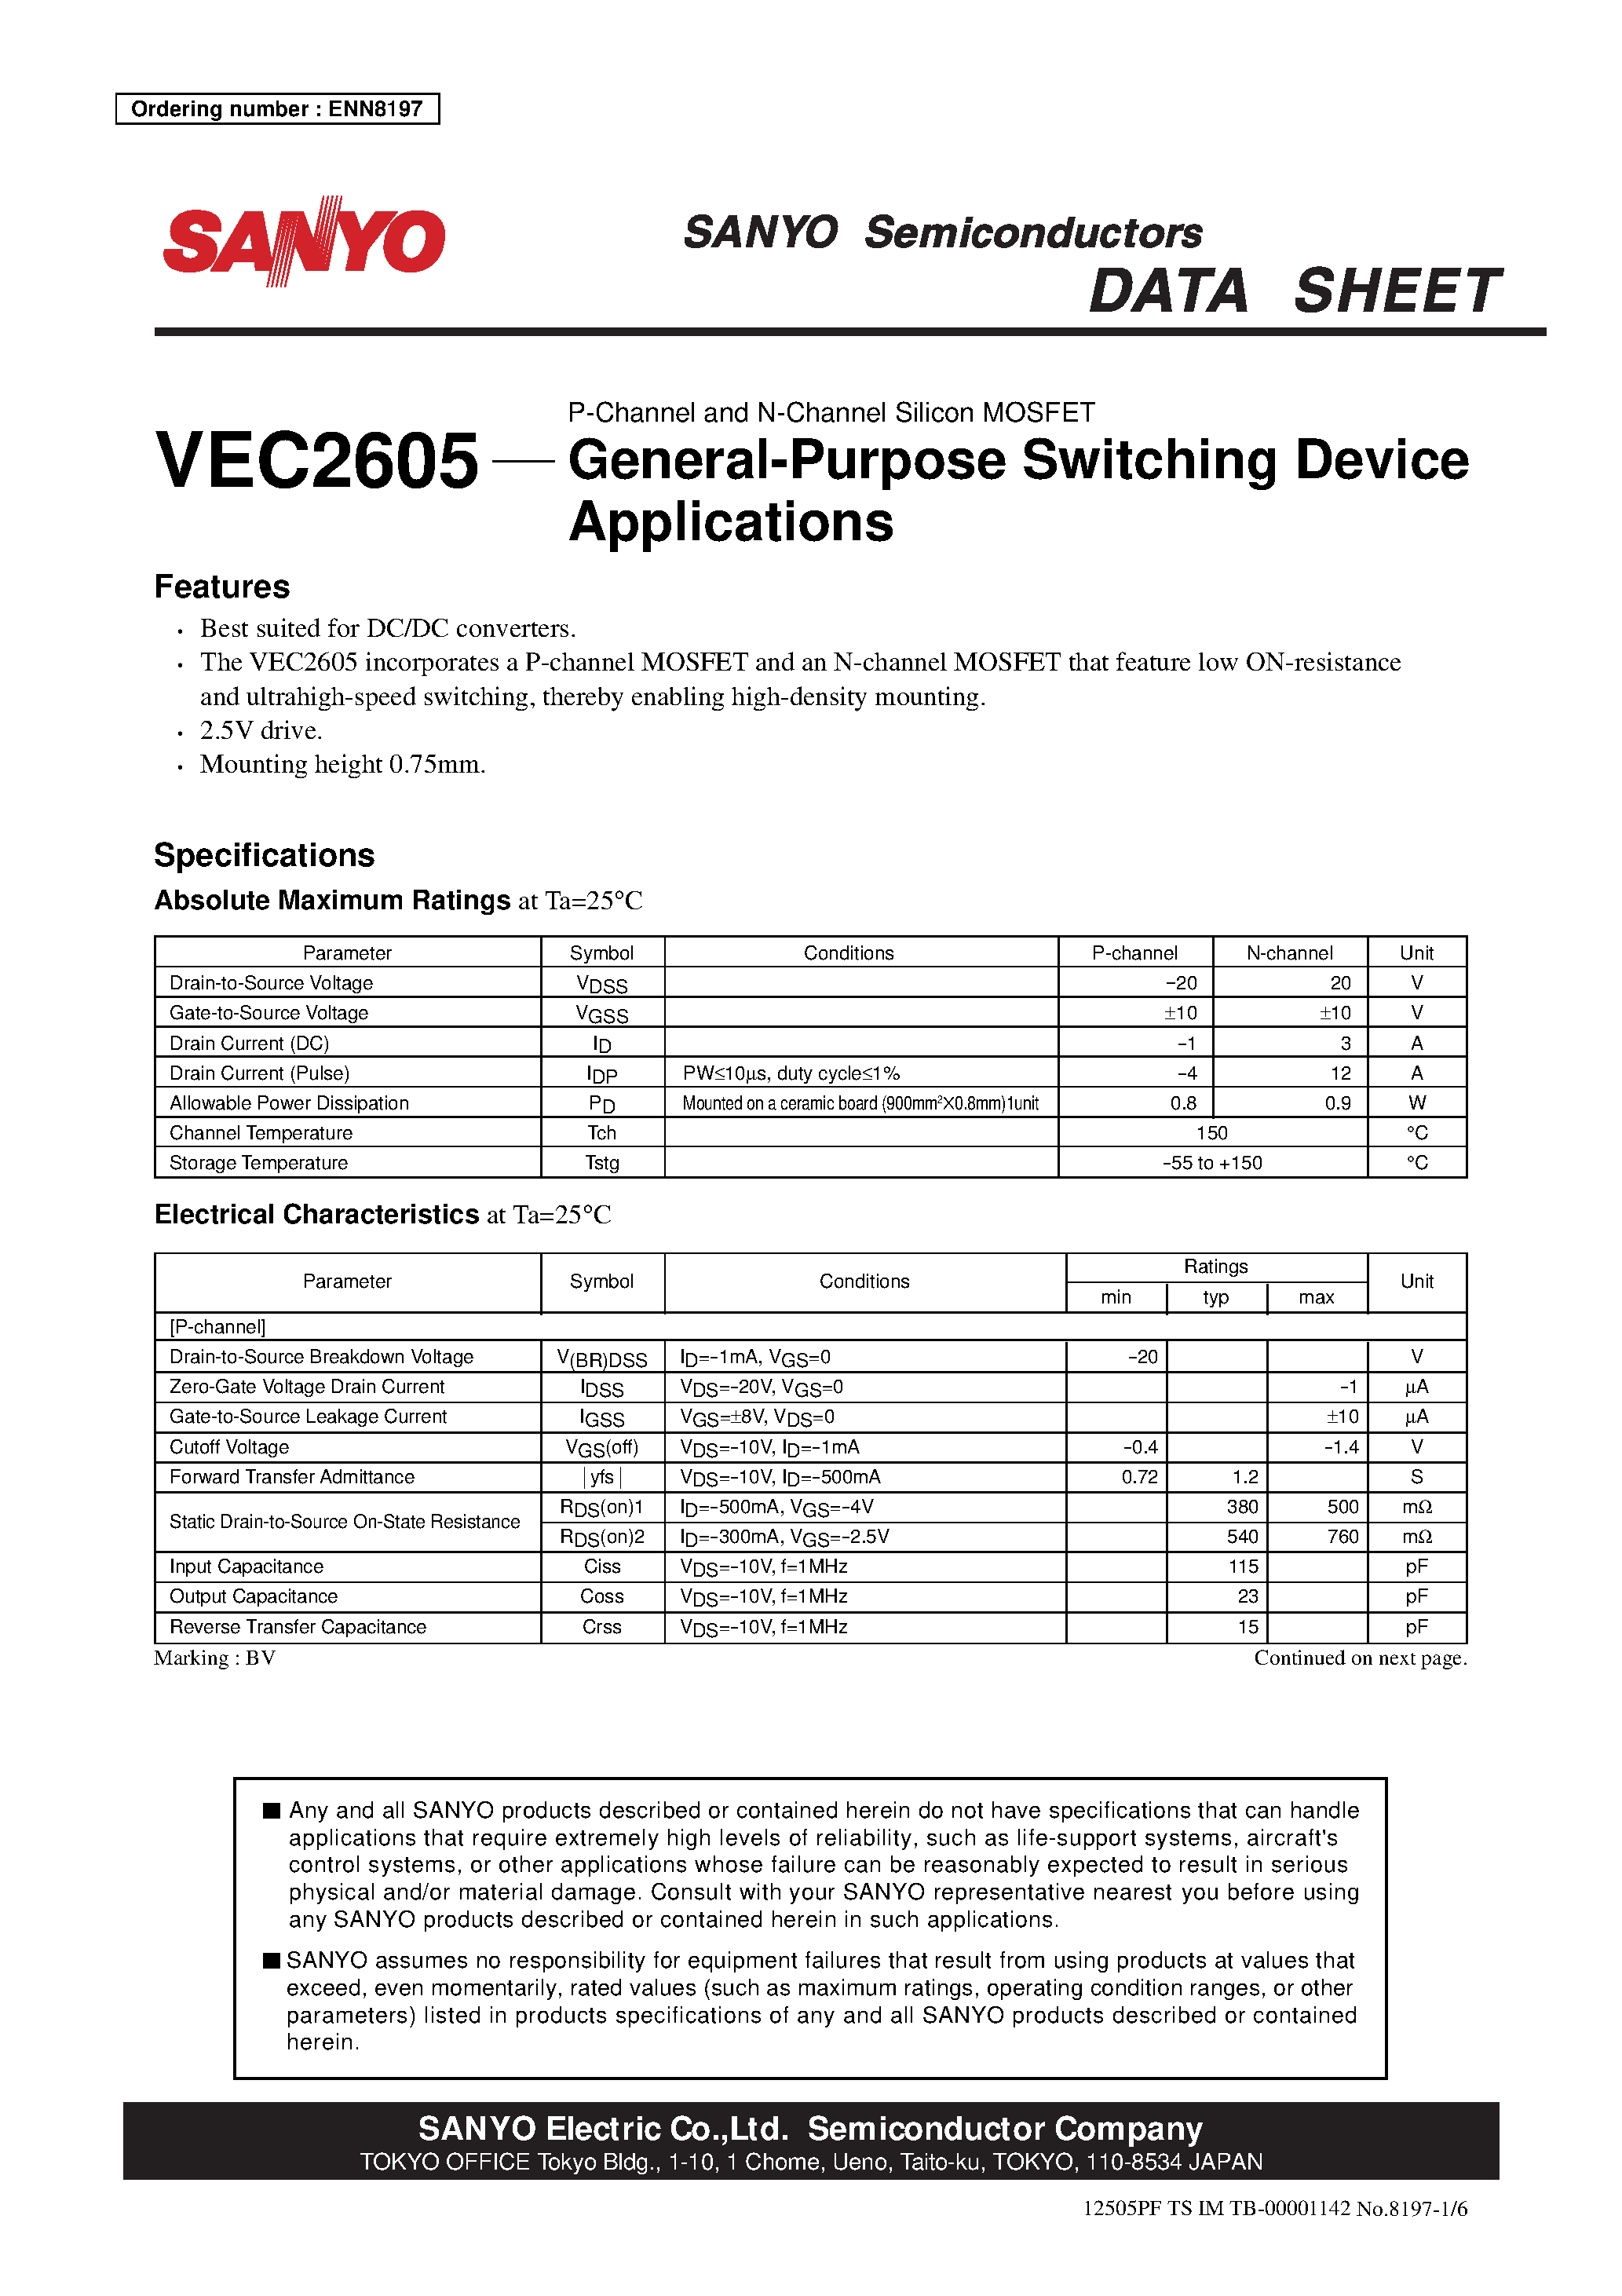 Datasheet VEC2605 - P-Channel and N-Channel Silicon MOSFET General-Purpose Switching Device Applications page 1